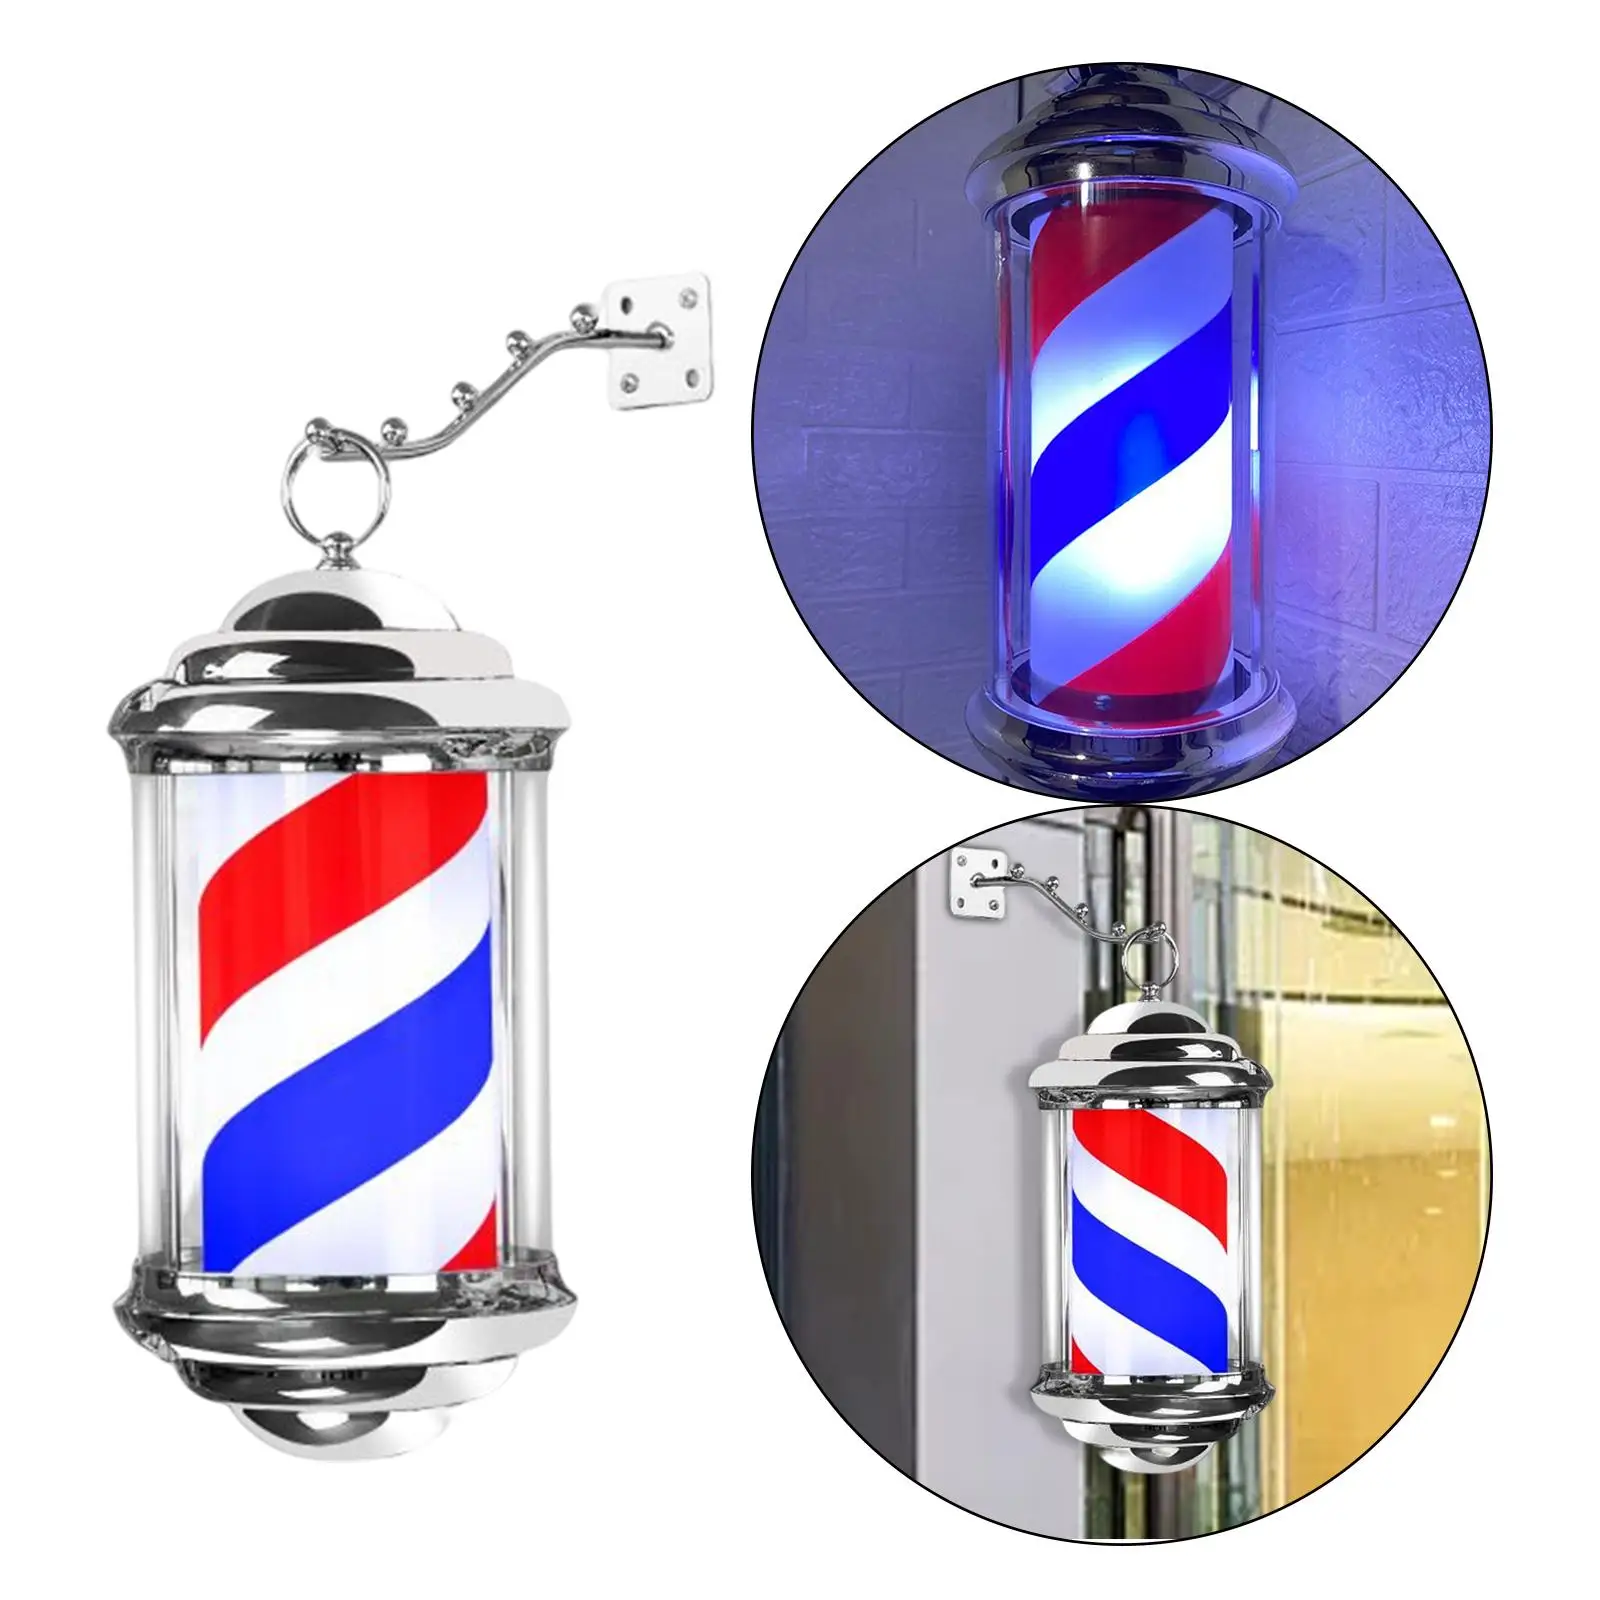 Barber Shop Pole Light Stripe Rotating Hair Salon Shop Open Signs Water Resistant Neon Signs Windproof LED Lamp for Party Indoor